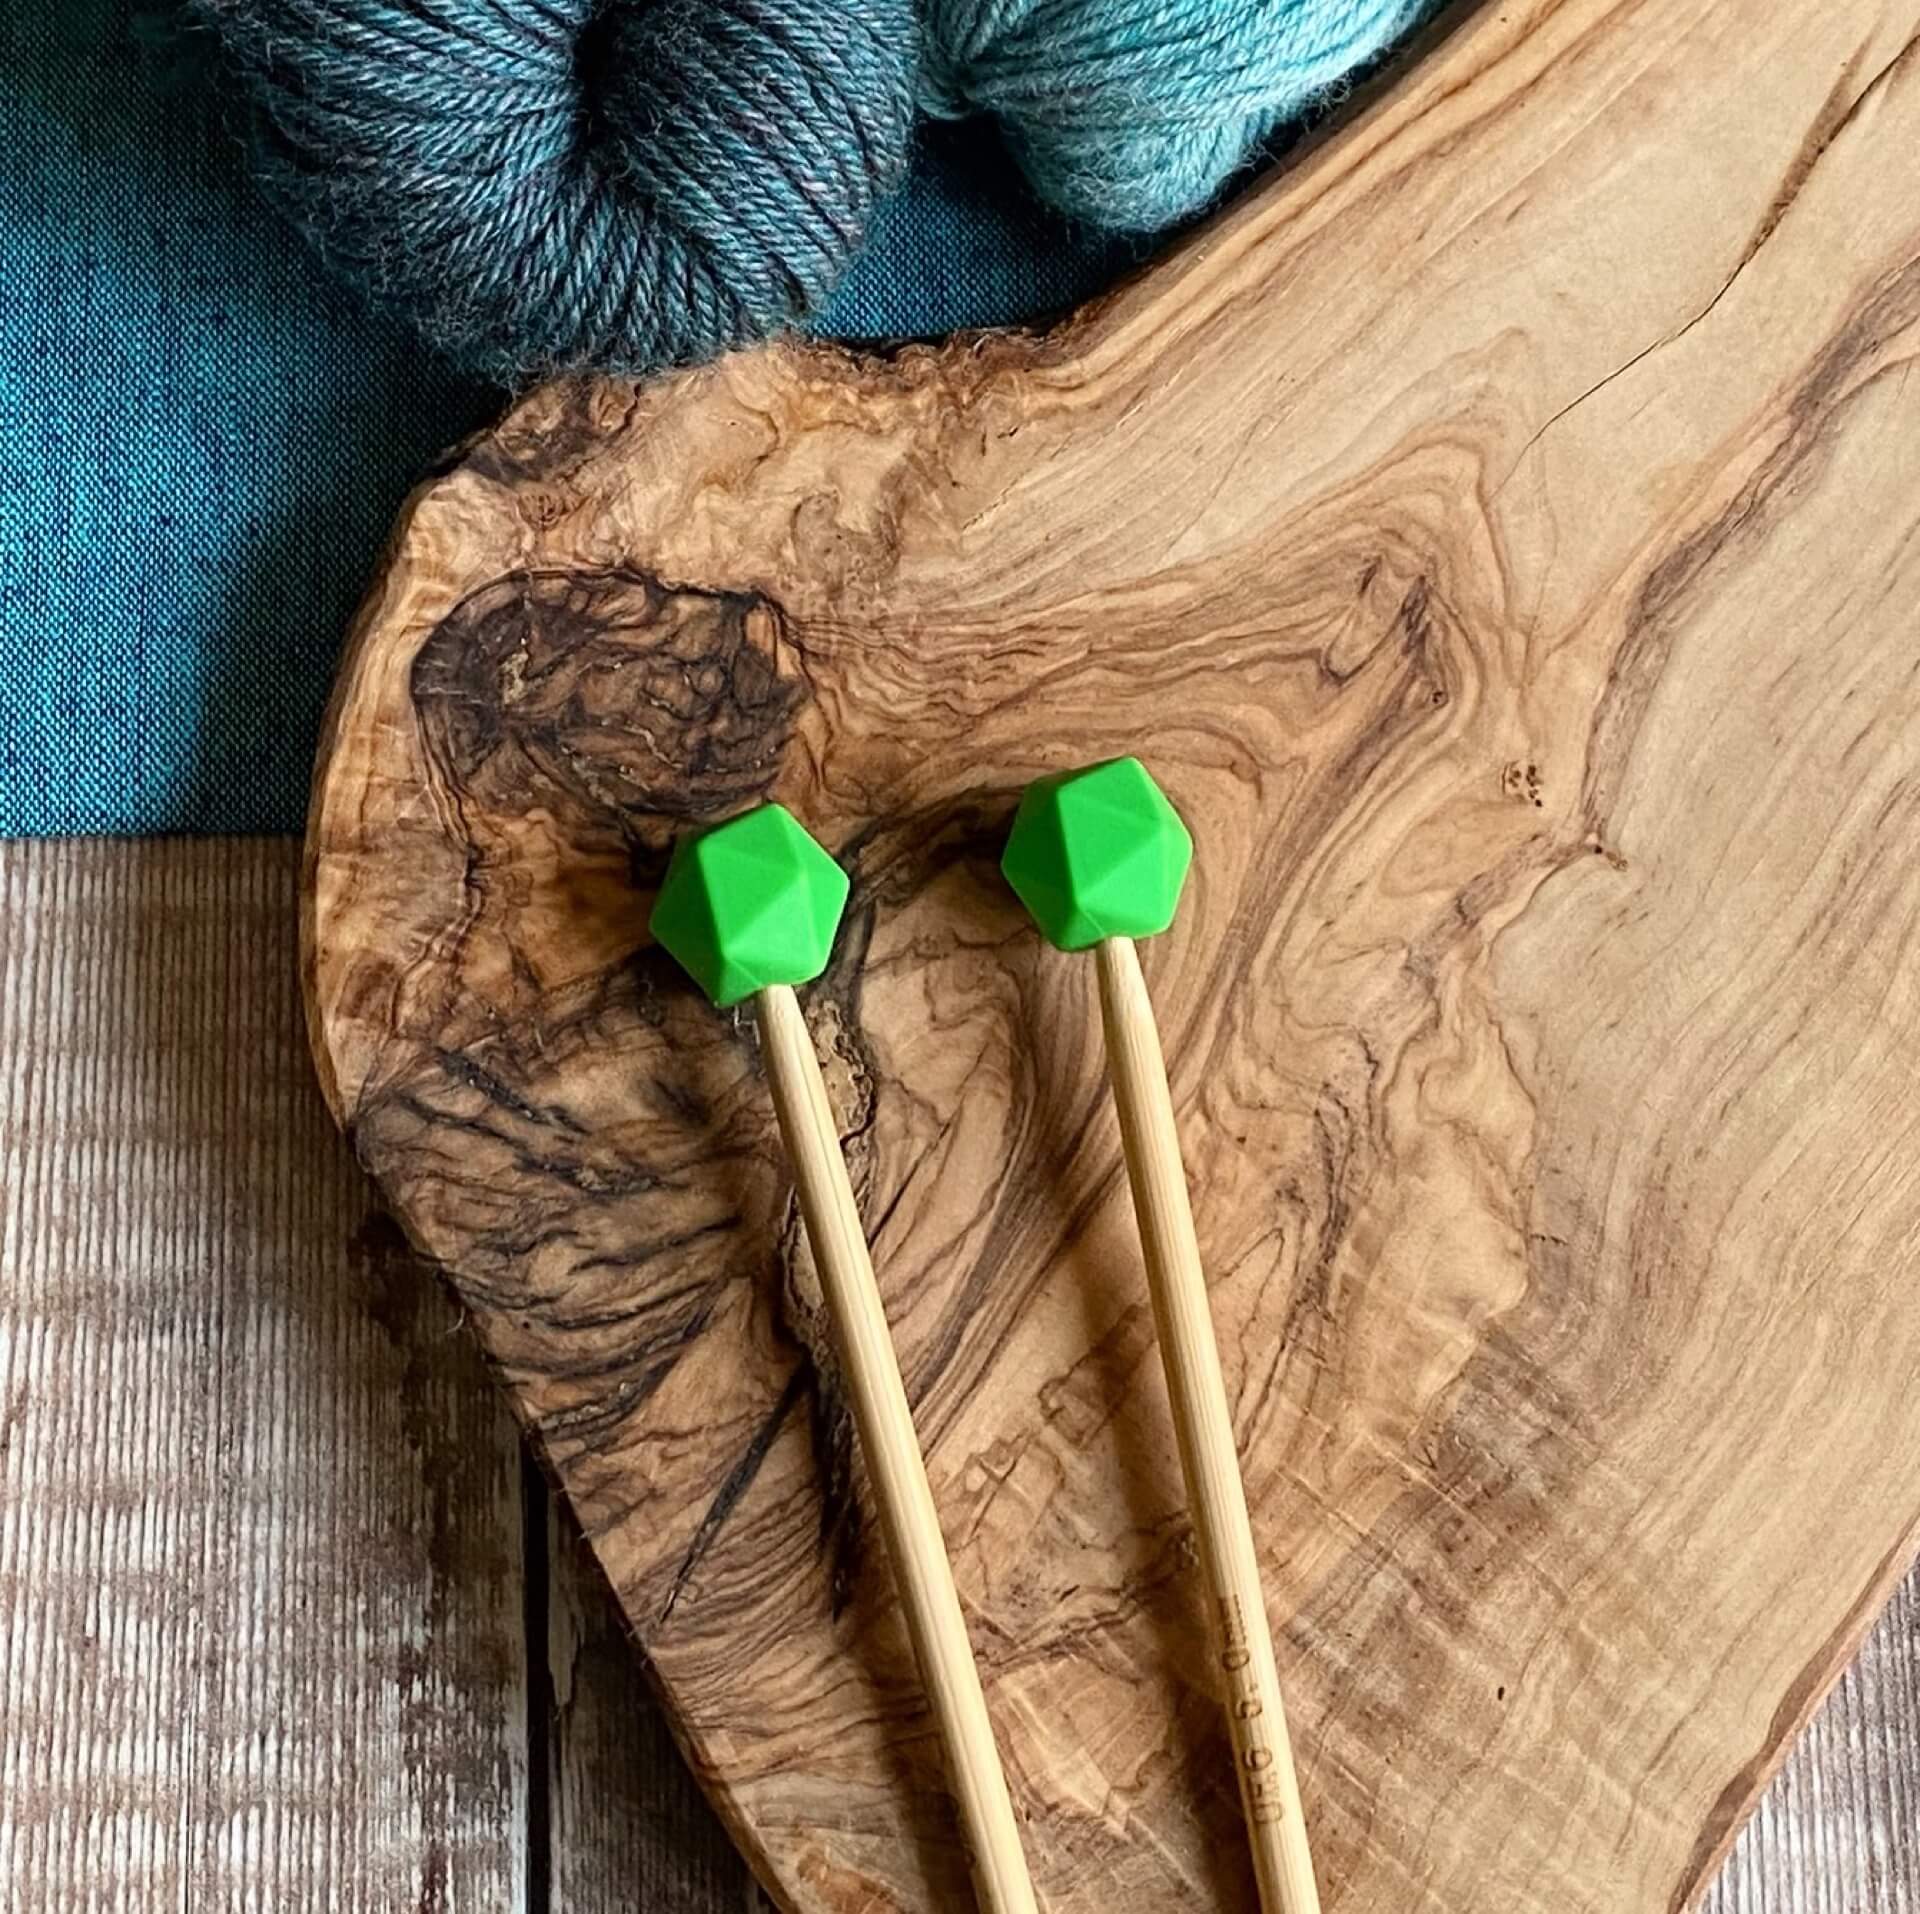 Summer Green needle protectors to stop stitches escaping from knitting needles. A pair sit on a wooden table attached to knitting needles. 